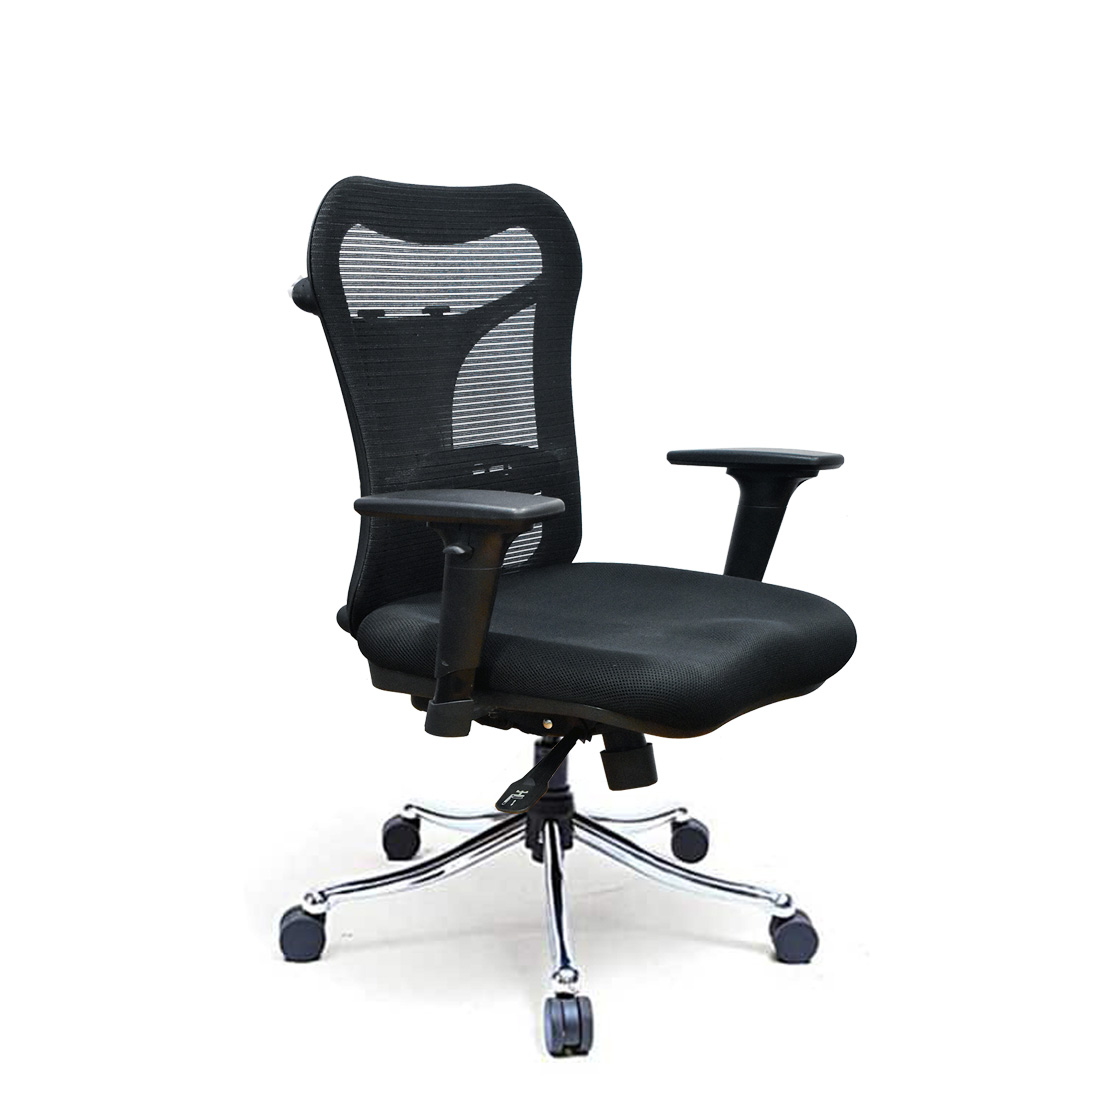 Full Adjustable Office Chair